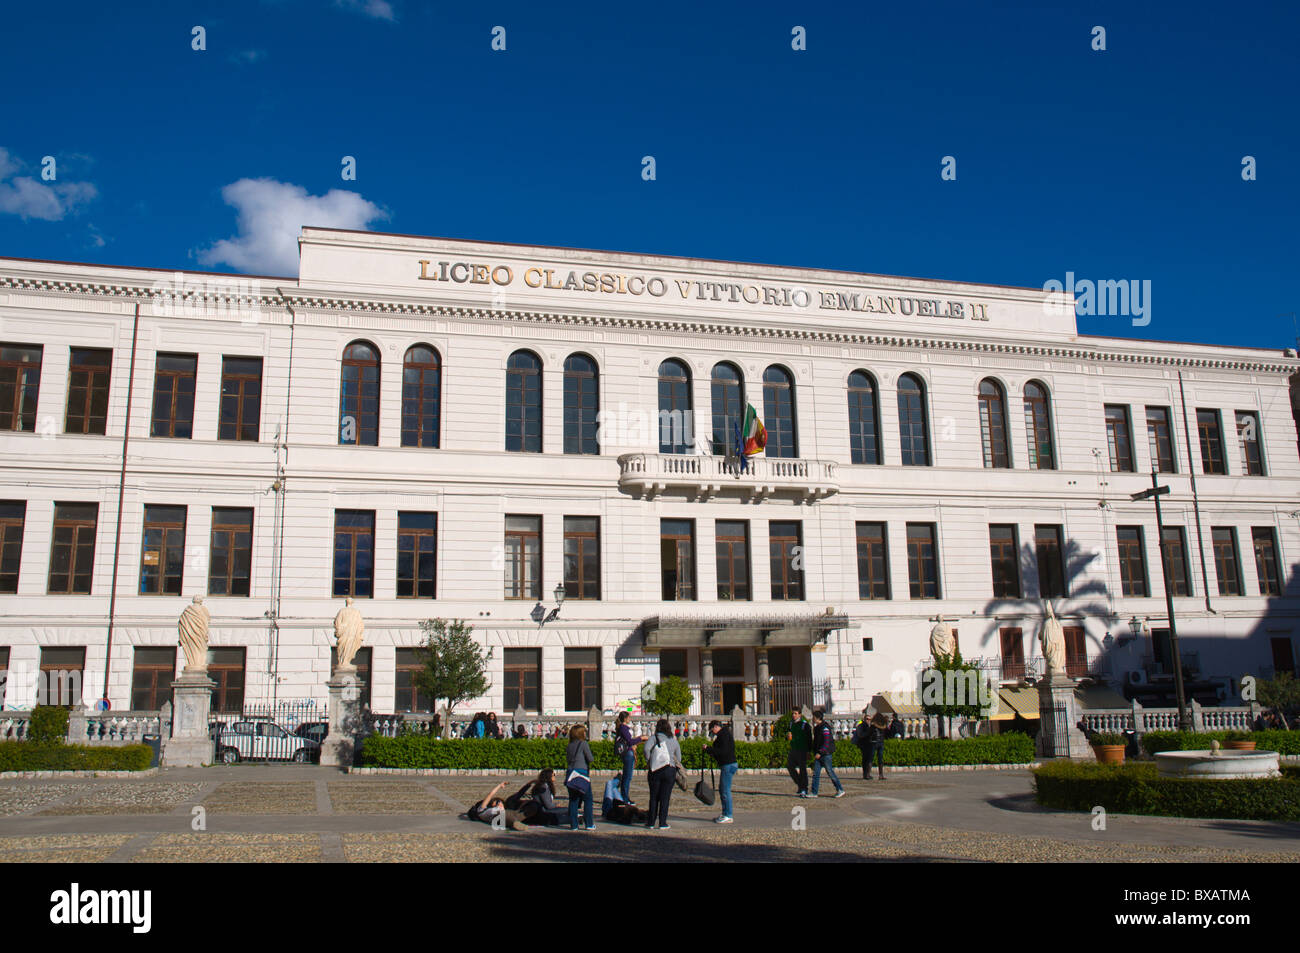 Students in front of Liceo Classico Vittorio Emanuele II high school at Piazza Indipendenca square Palermo Sicily Italy Stock Photo